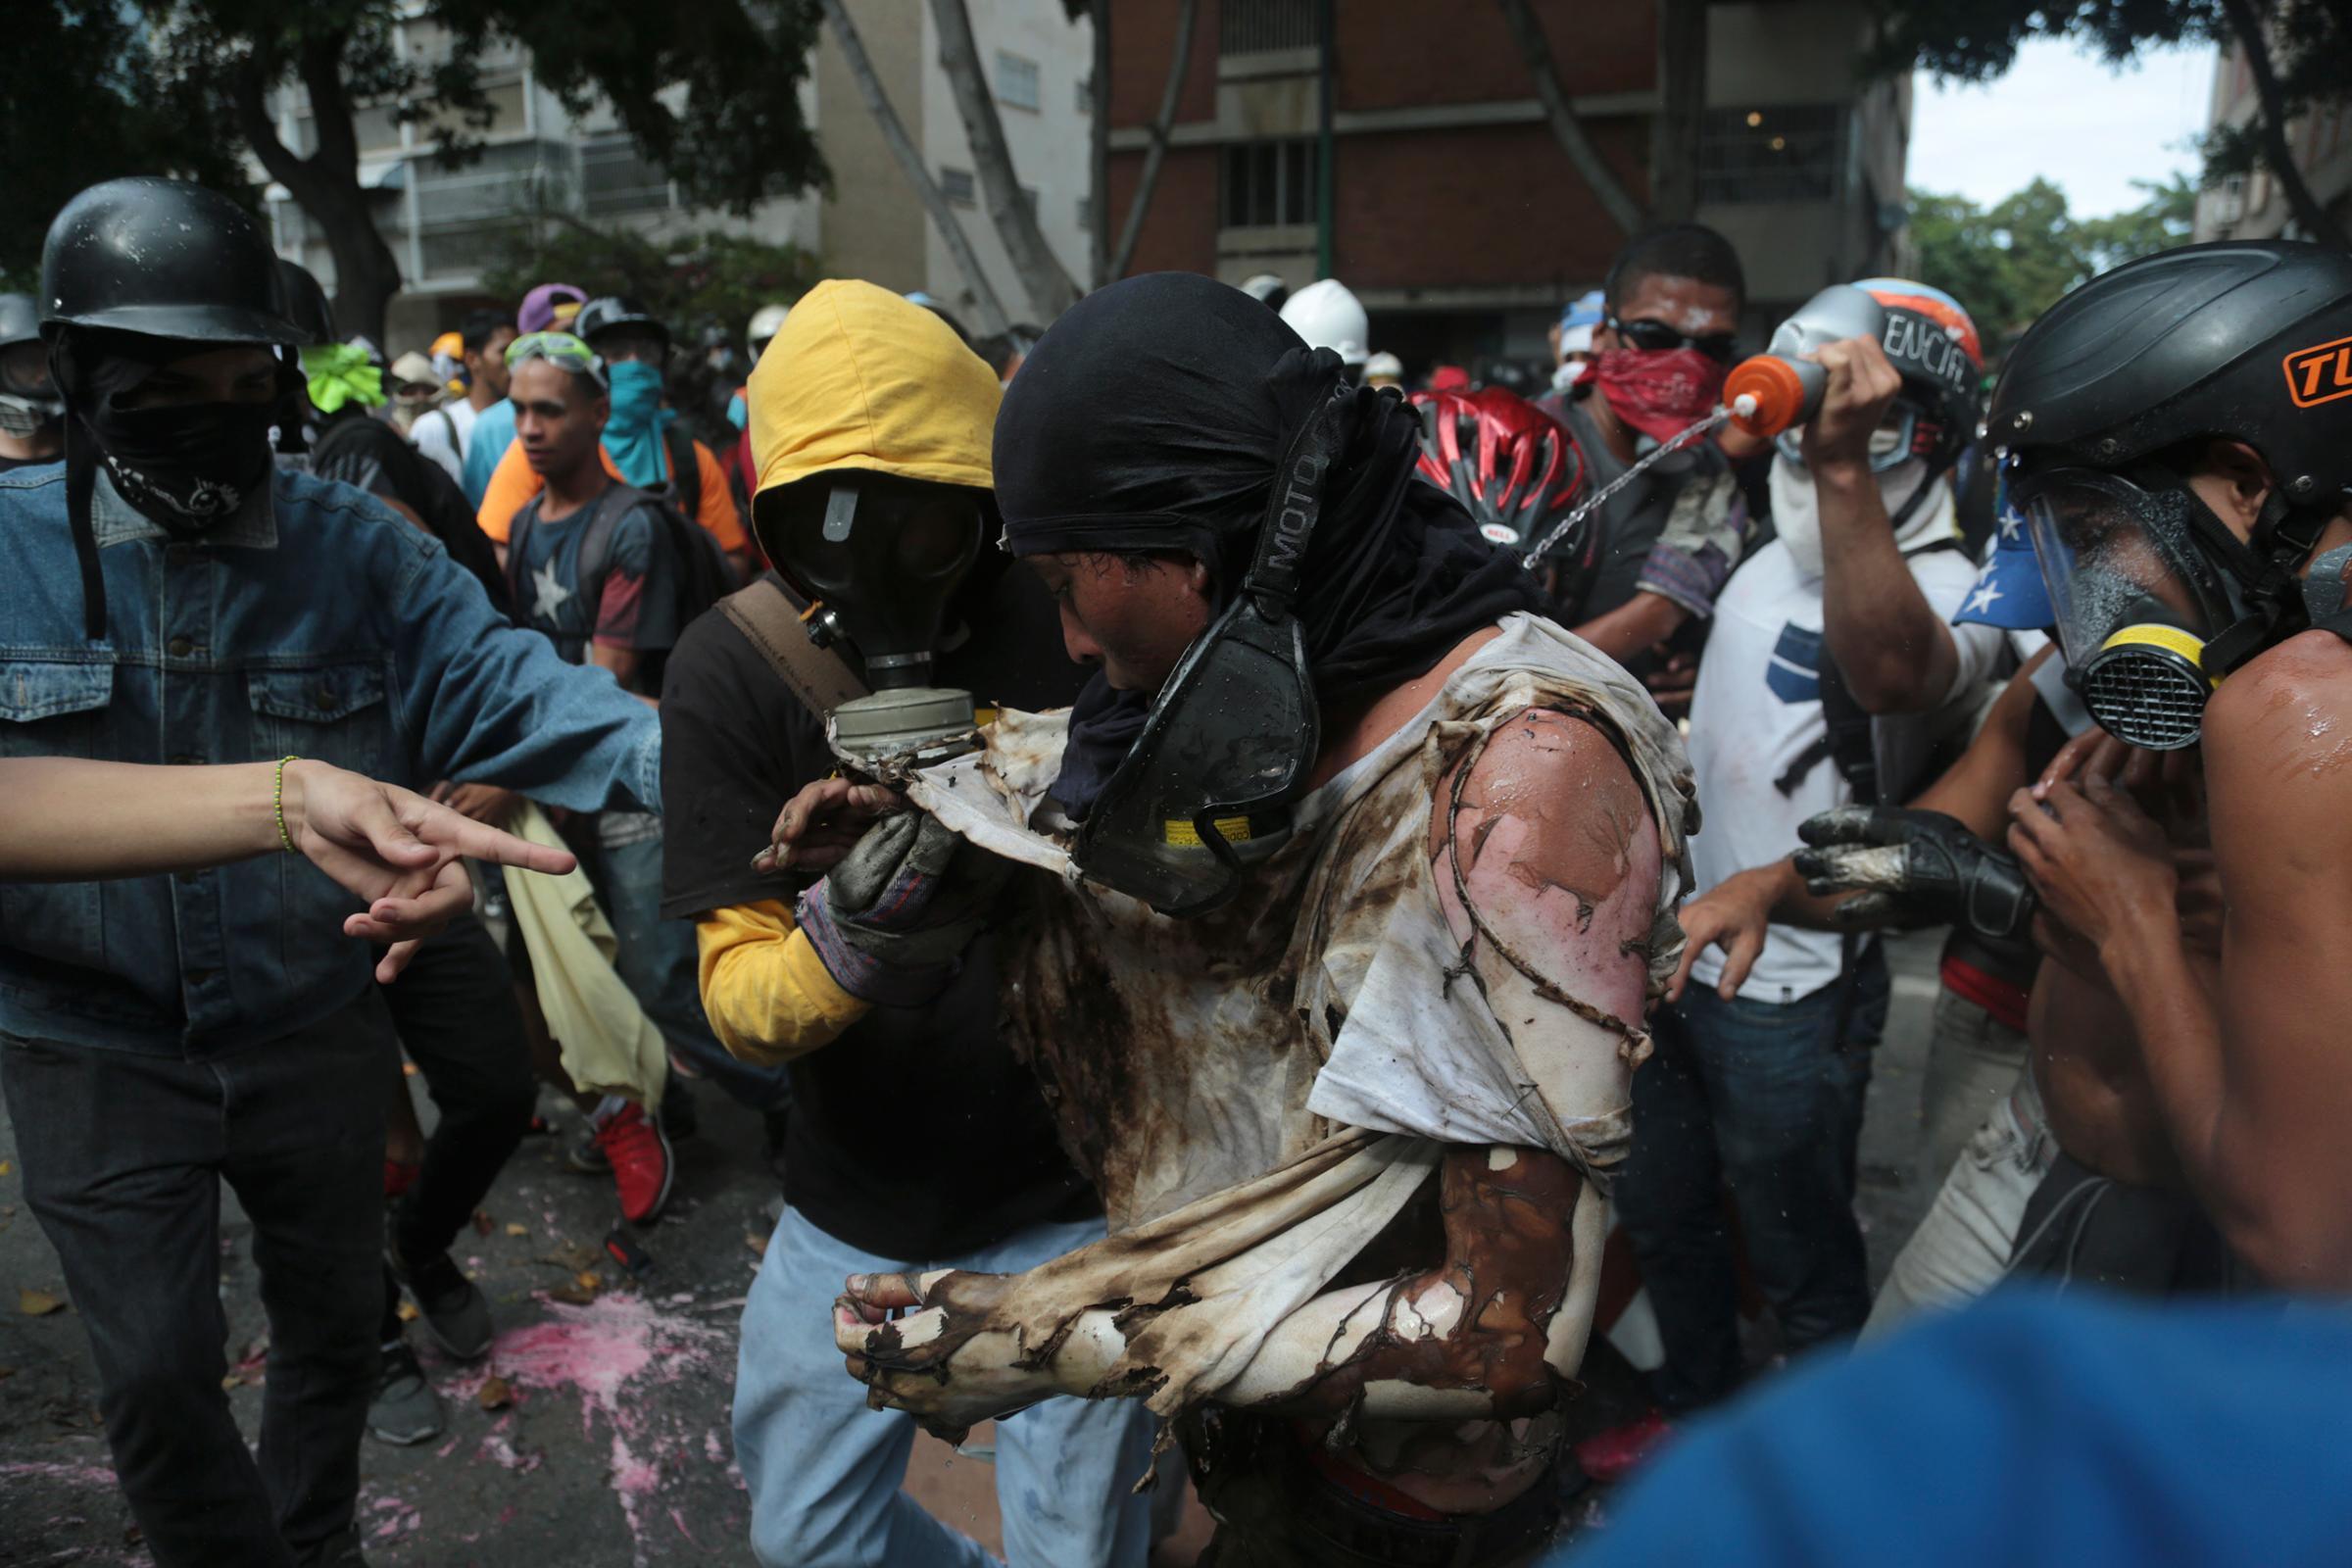 The man is aided by fellow protesters after he was burnt when demonstrators set fire to a Bolivarian National Guard motorbike as security forces block their march from reaching the National Assembly in Caracas, Venezuela, Wednesday, May 3, 2017.